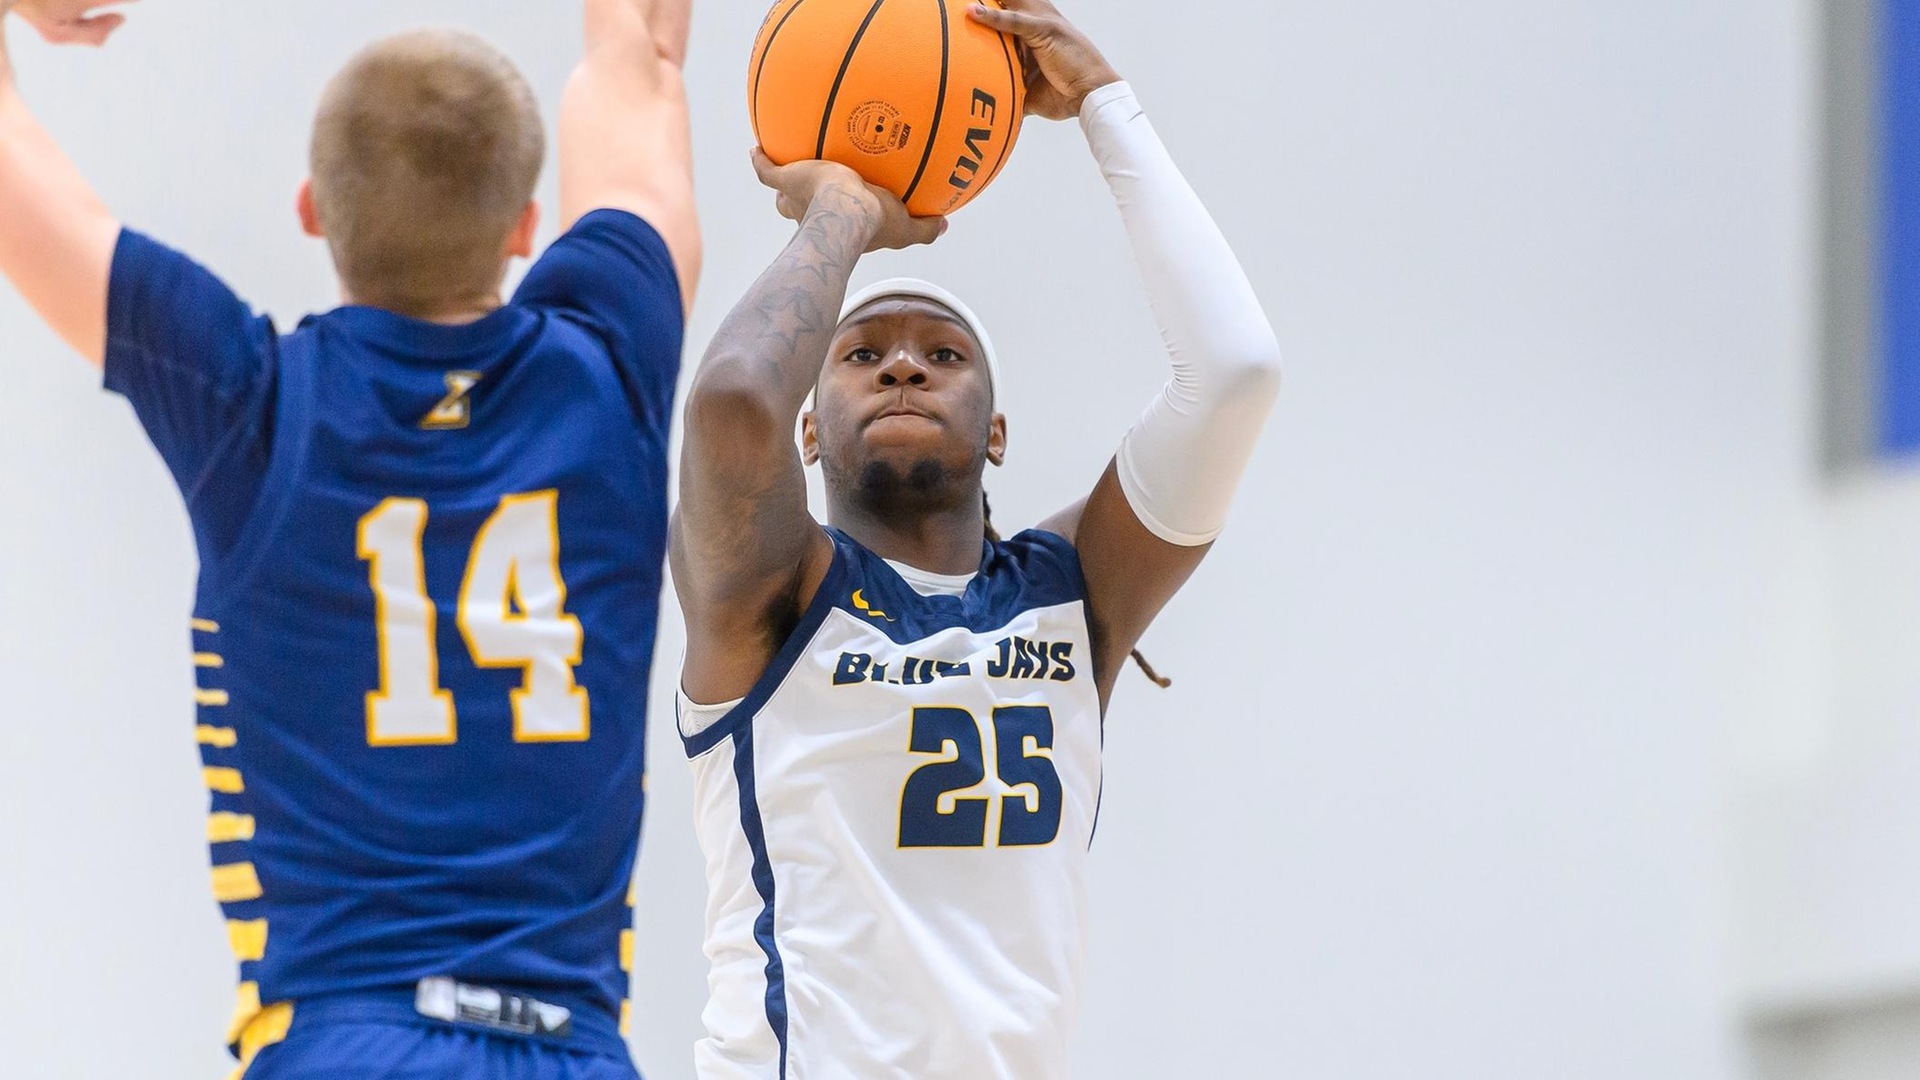 Mitchell Nets 1,000th Career Point, Powers Men's Hoops Past Dean Tuesday Night